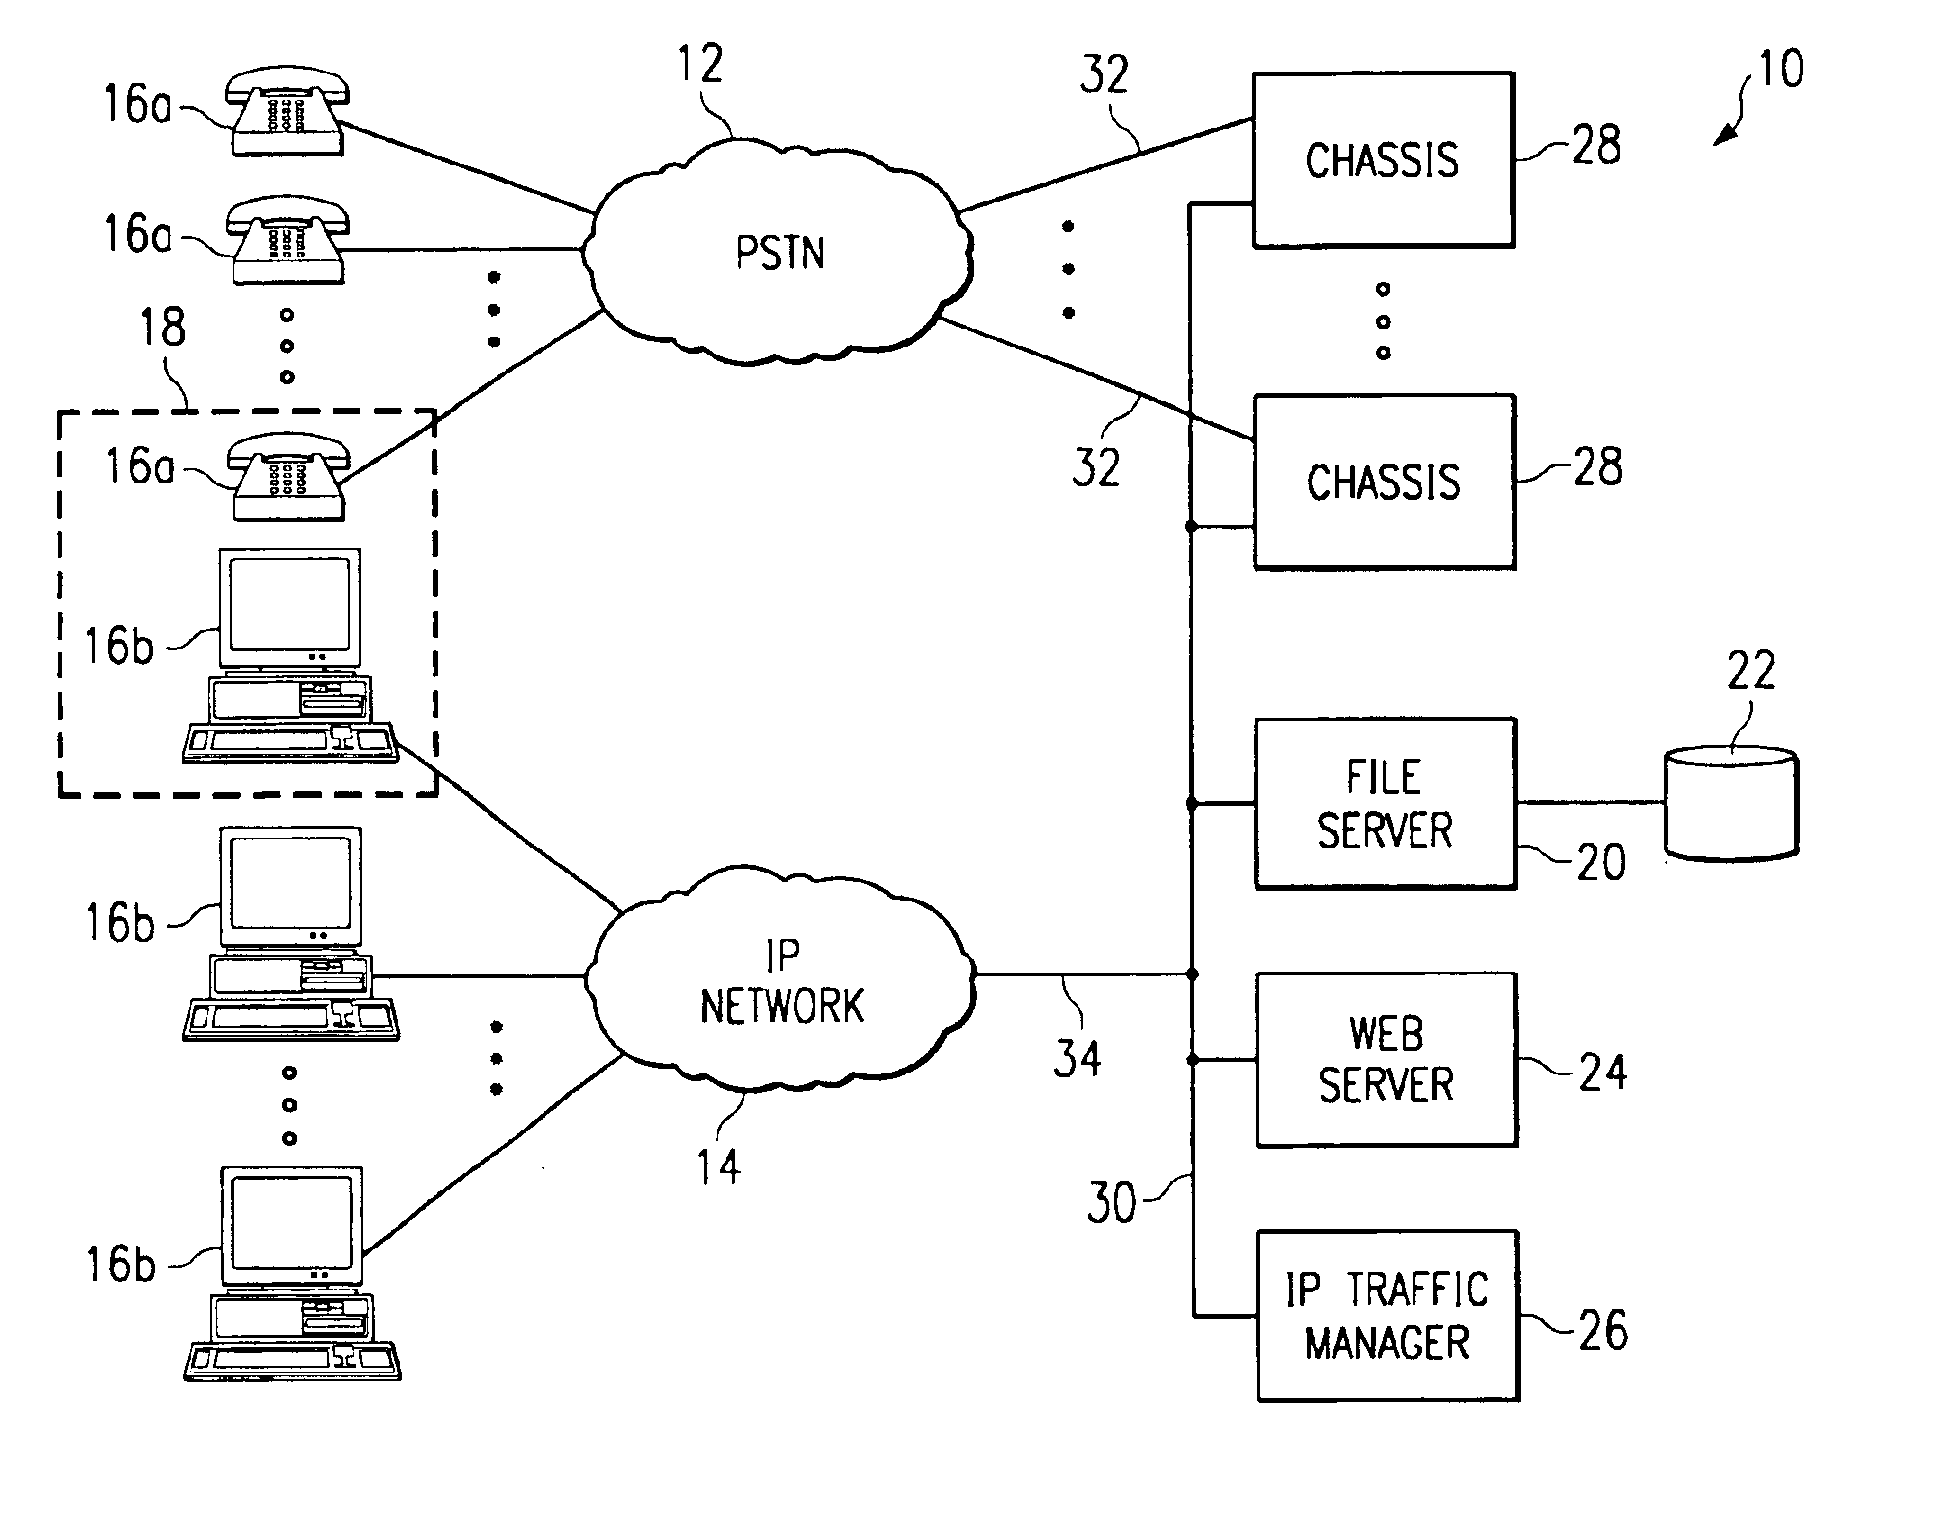 Internet-enabled conferencing system and method accommodating PSTN and IP traffic